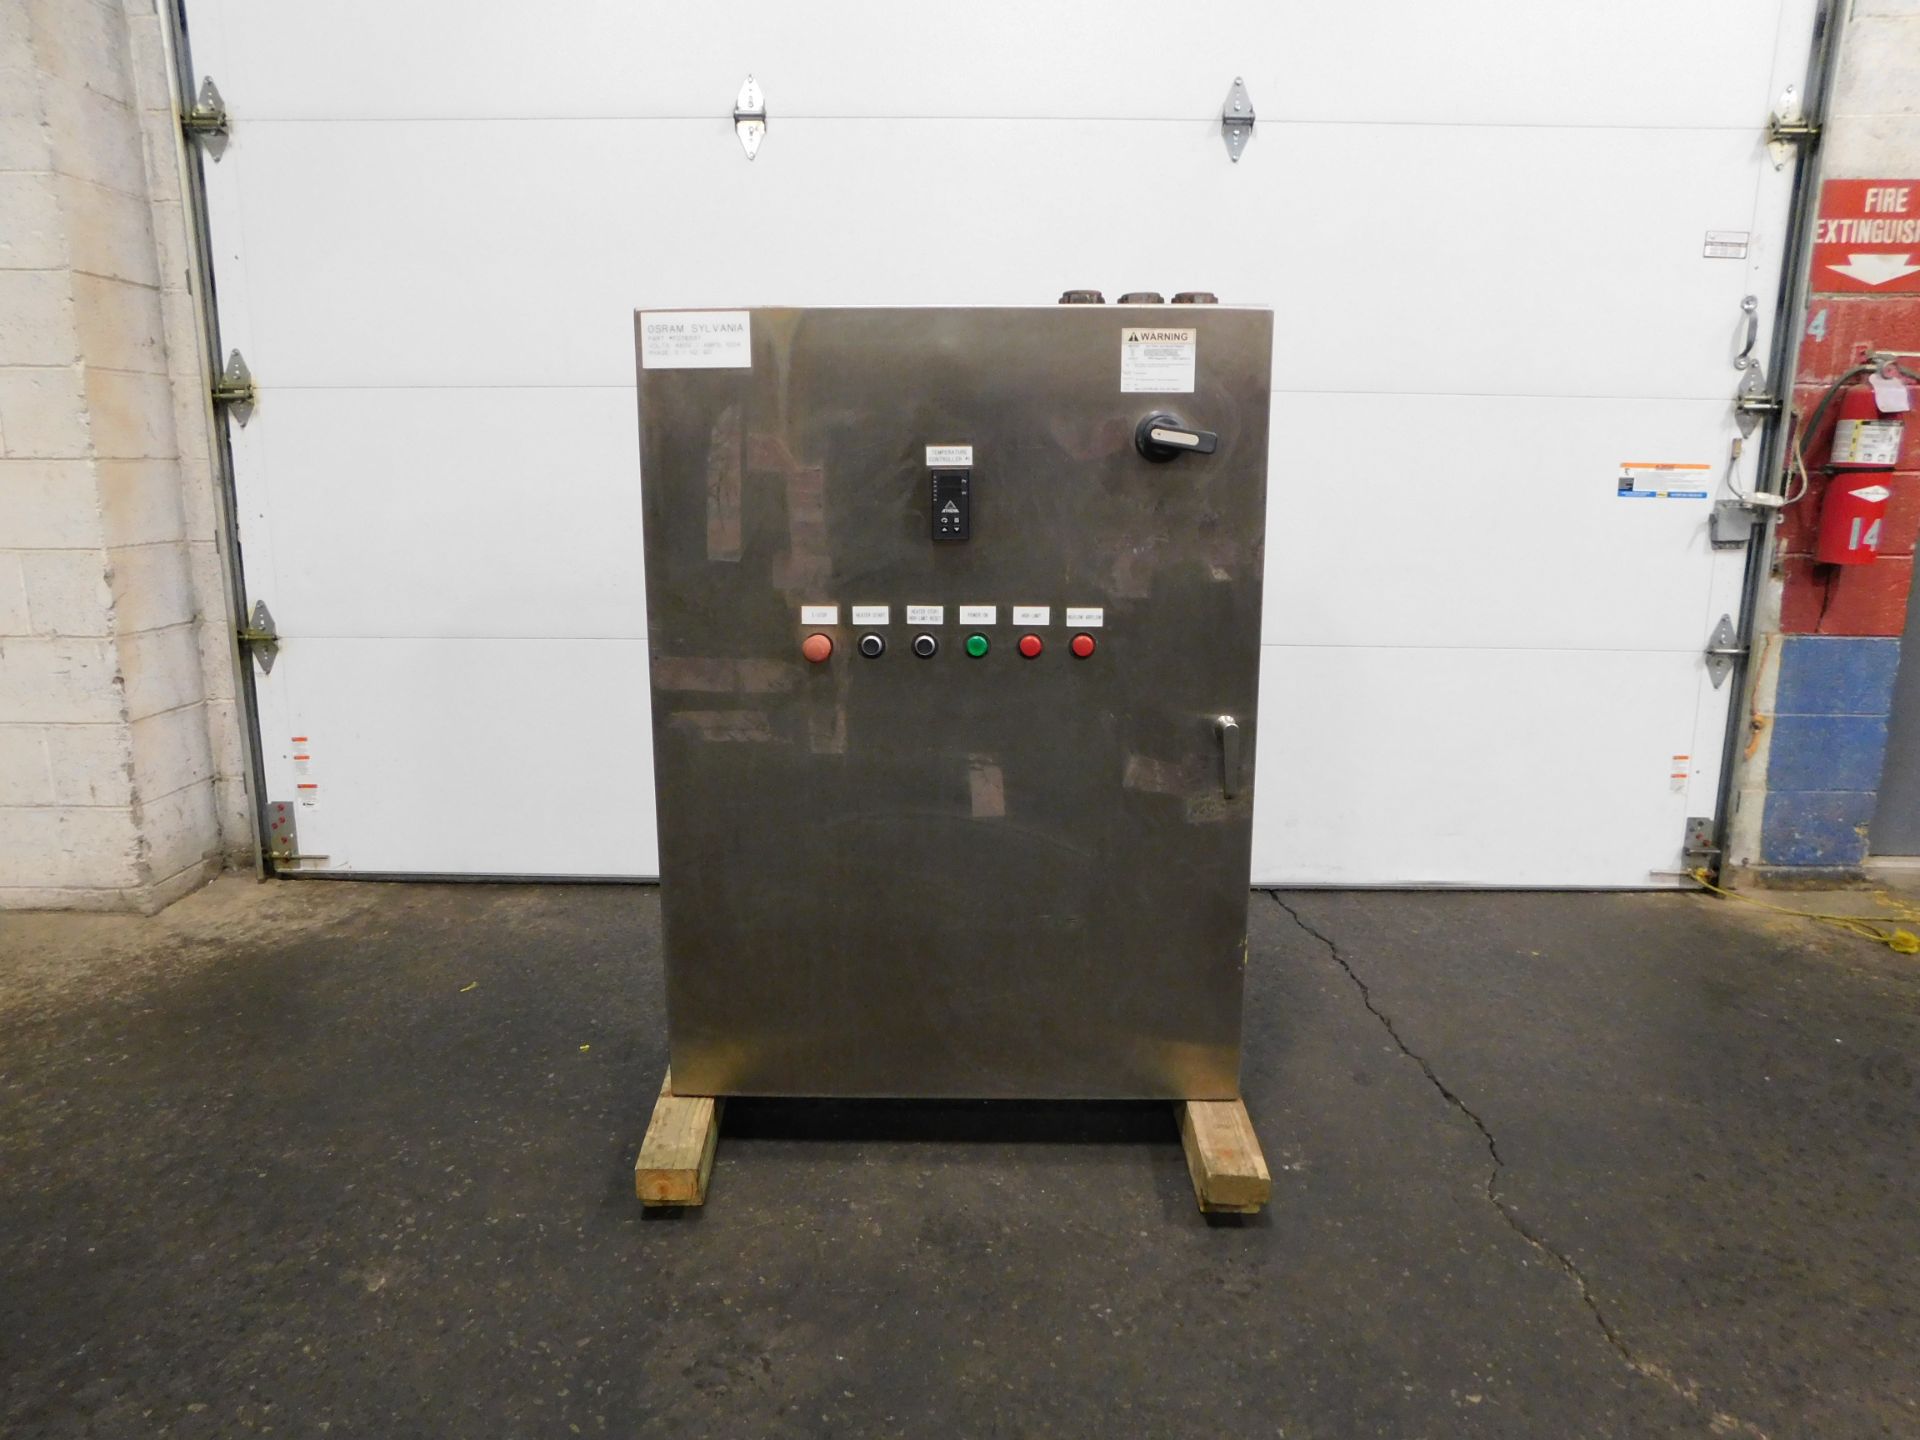 RITTAL STAINLESS STEEL ELECTRICAL CABINET ENCLOSURE. 36" x 47" x 12".